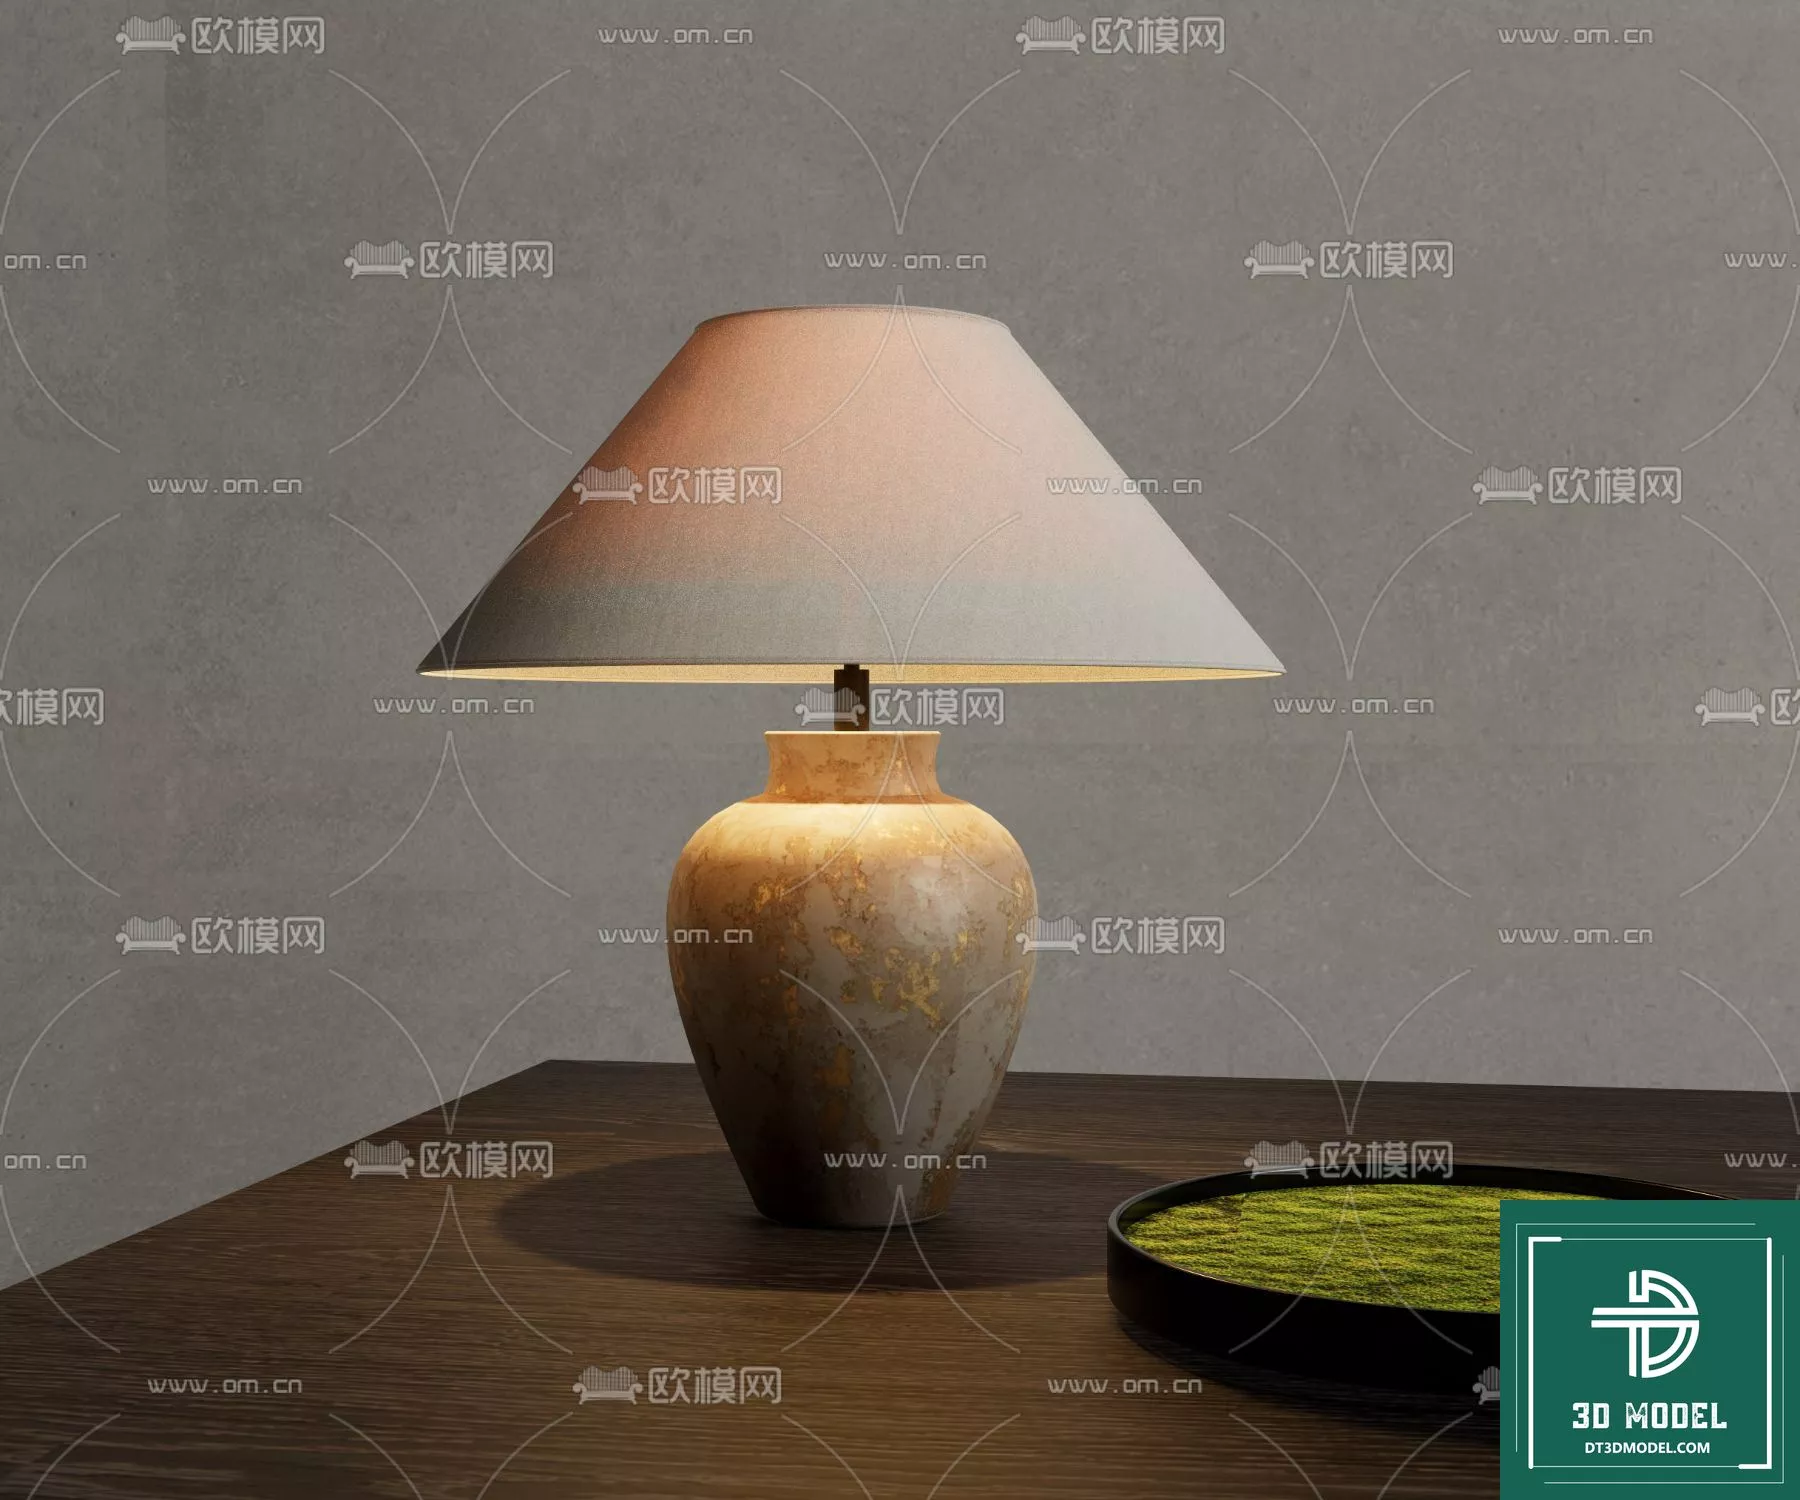 MODERN TABLE LAMP - SKETCHUP 3D MODEL - VRAY OR ENSCAPE - ID14550